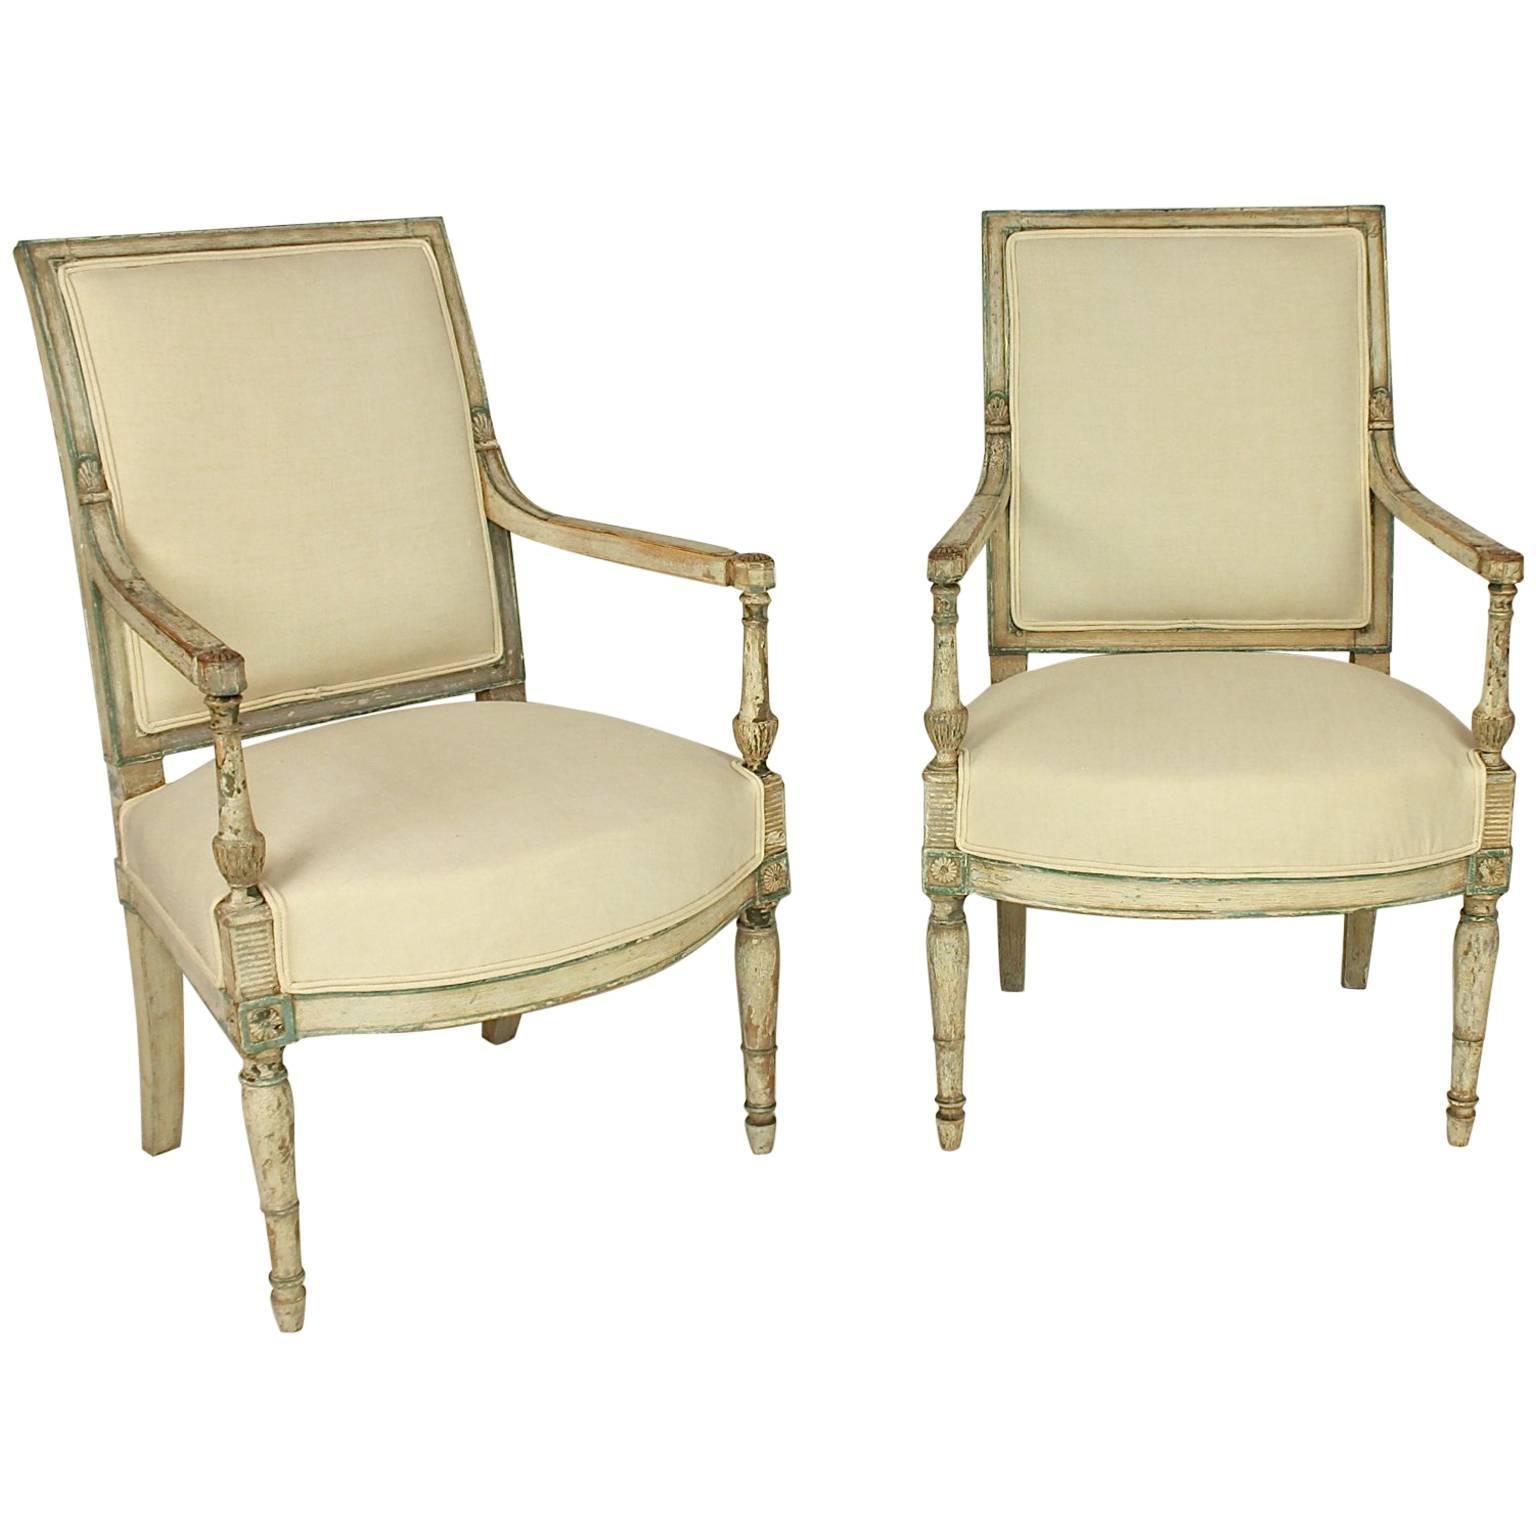 Pair of Late 18th Century Directoire Paint Wood Fauteuils or Armchairs